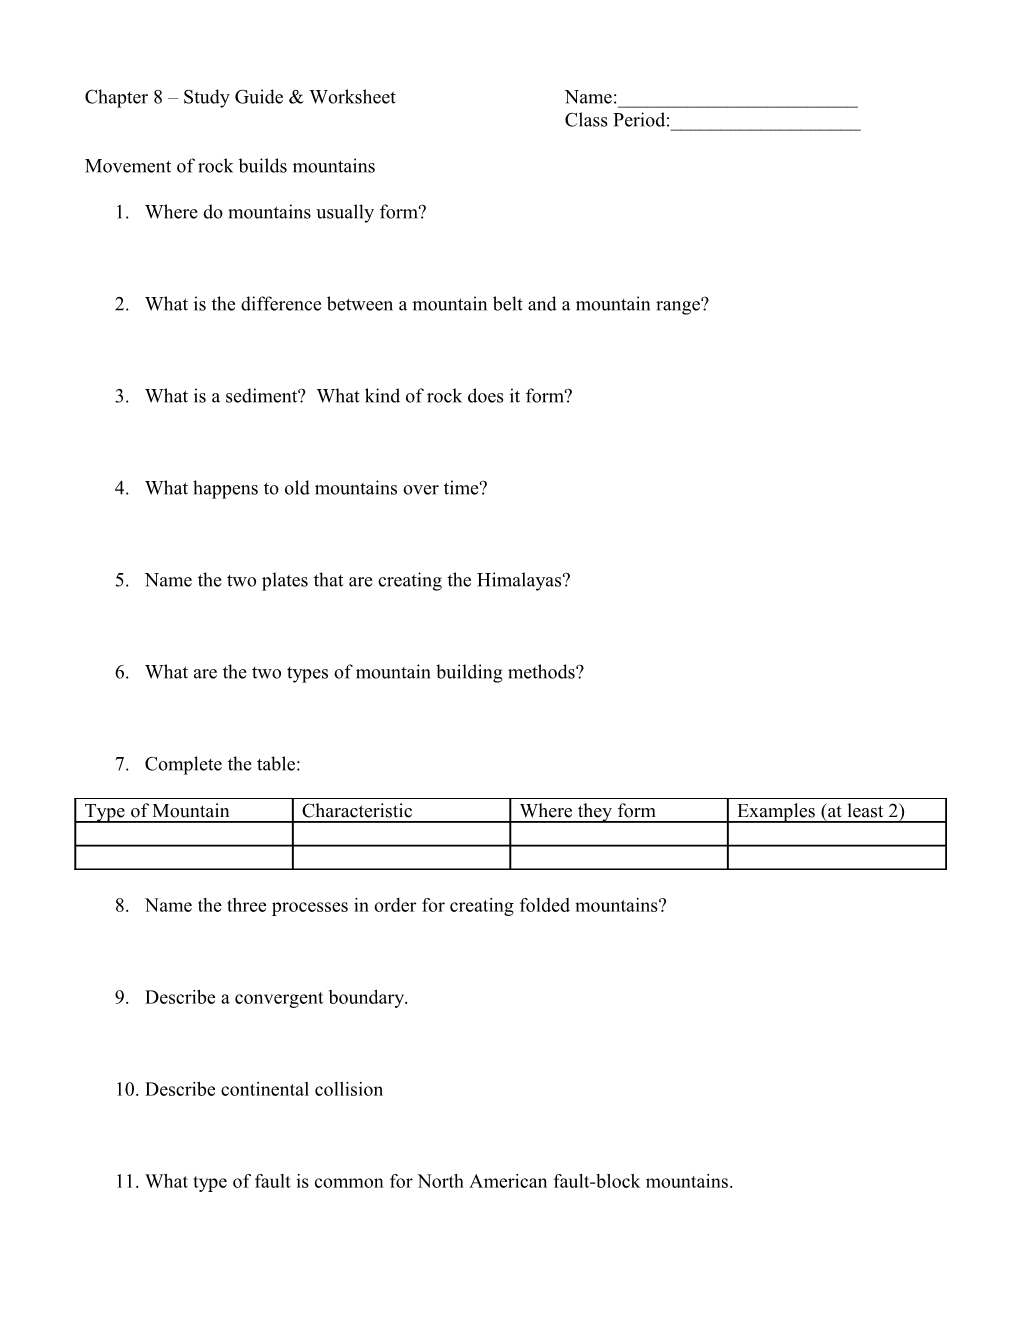 Chapter 8 Study Guide & Worksheet